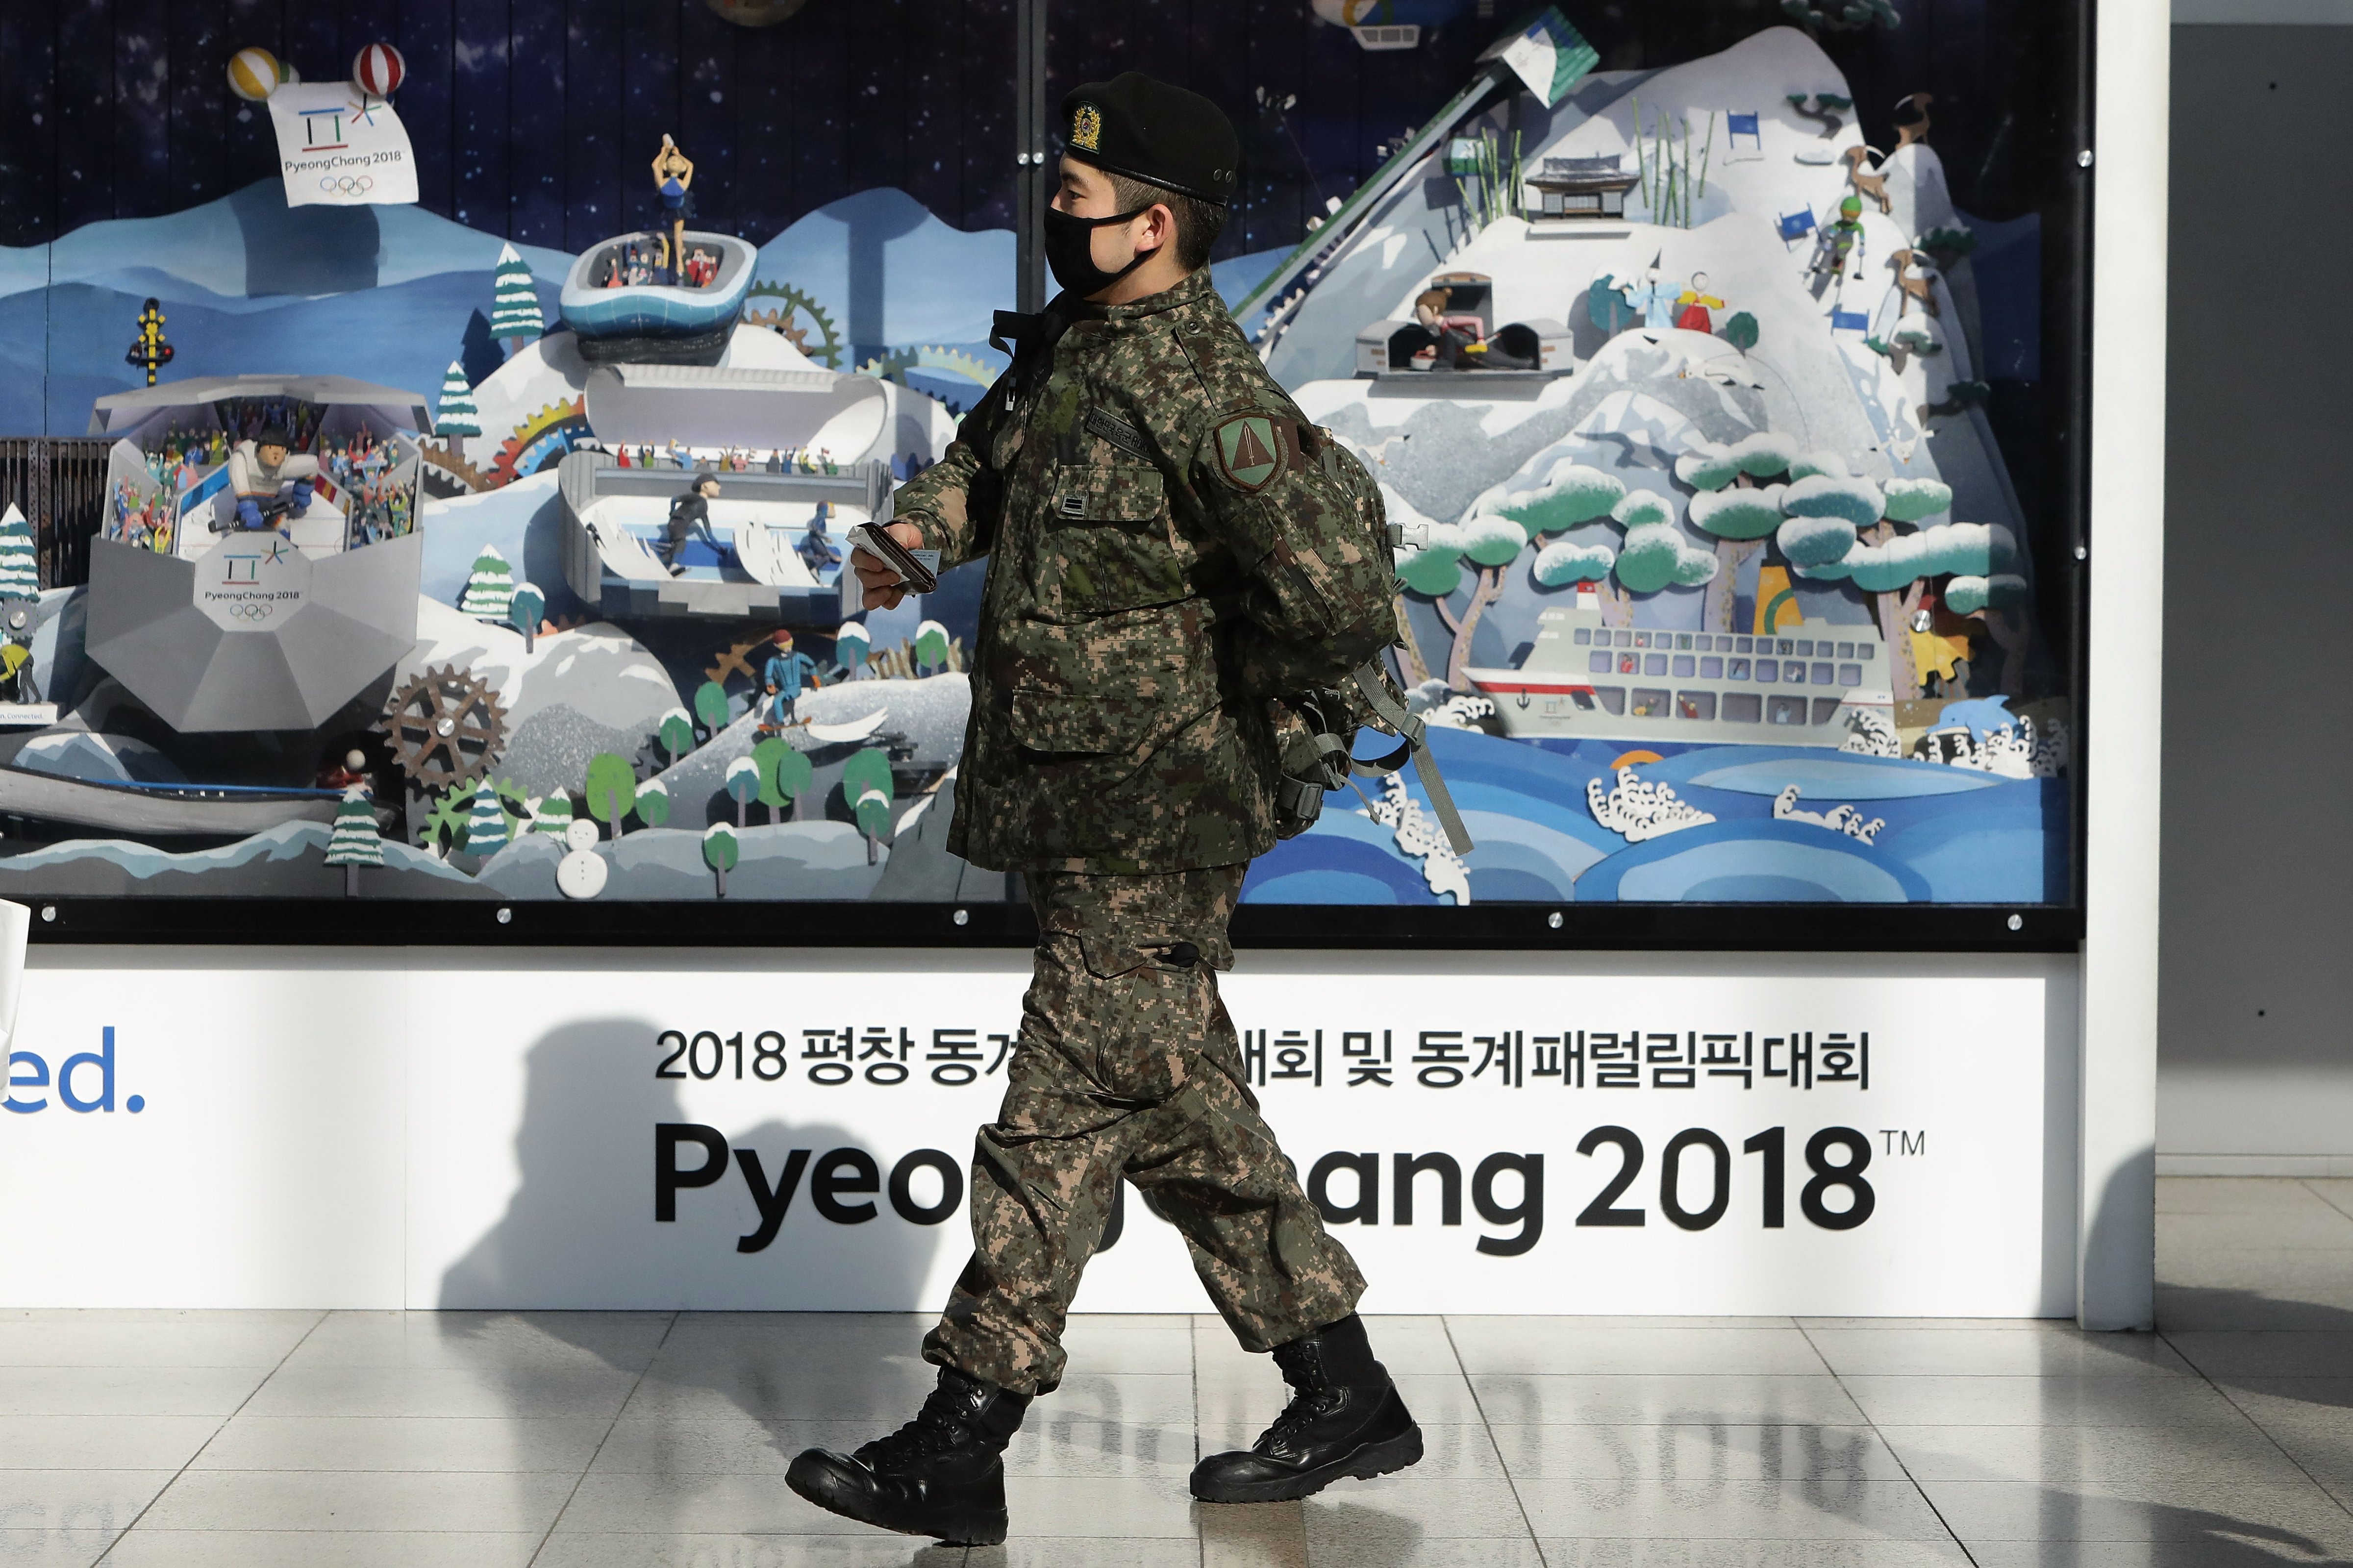 A South Korean soldier walks past the 2018 Pyeongchang Winter Olympic and Paralympic Games PR booth in Seoul, South Korea on Jan. 5, 2018. (Chung Sung-Jun—Getty Images)